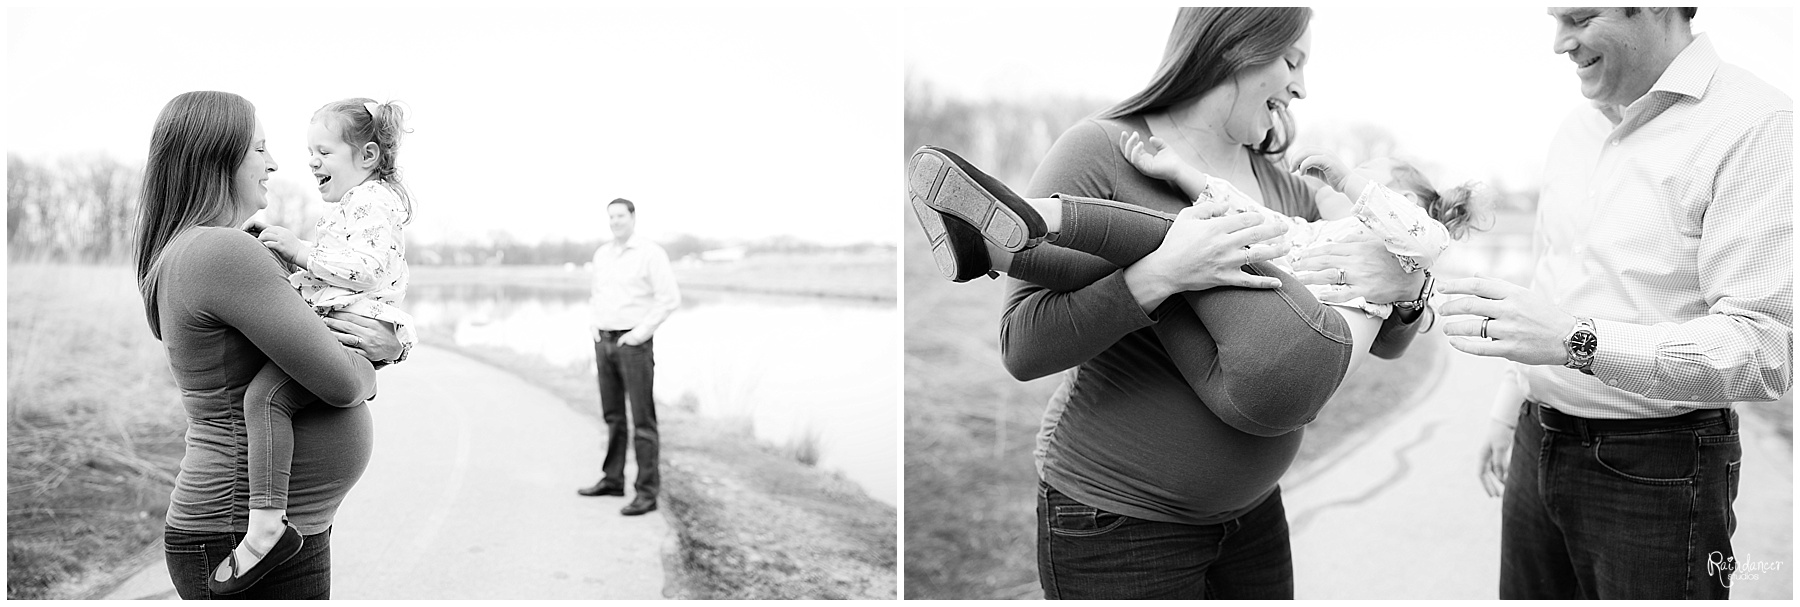 Indianapolis Maternity photographer, Indy maternity photographer, Indianapolis family photographer, Indy family photographer, Indy maternity photography, Indianapolis maternity photography, Indy baby photographer, Indianapolis Newborn Photographer, Indianapolis baby photographer, Indianapolis family photographer, Indianapolis family photography, Indy family photographer, Indy family photography, Indy children photographer, Indianapolis children photographer, Indianapolis lifestyle photographer